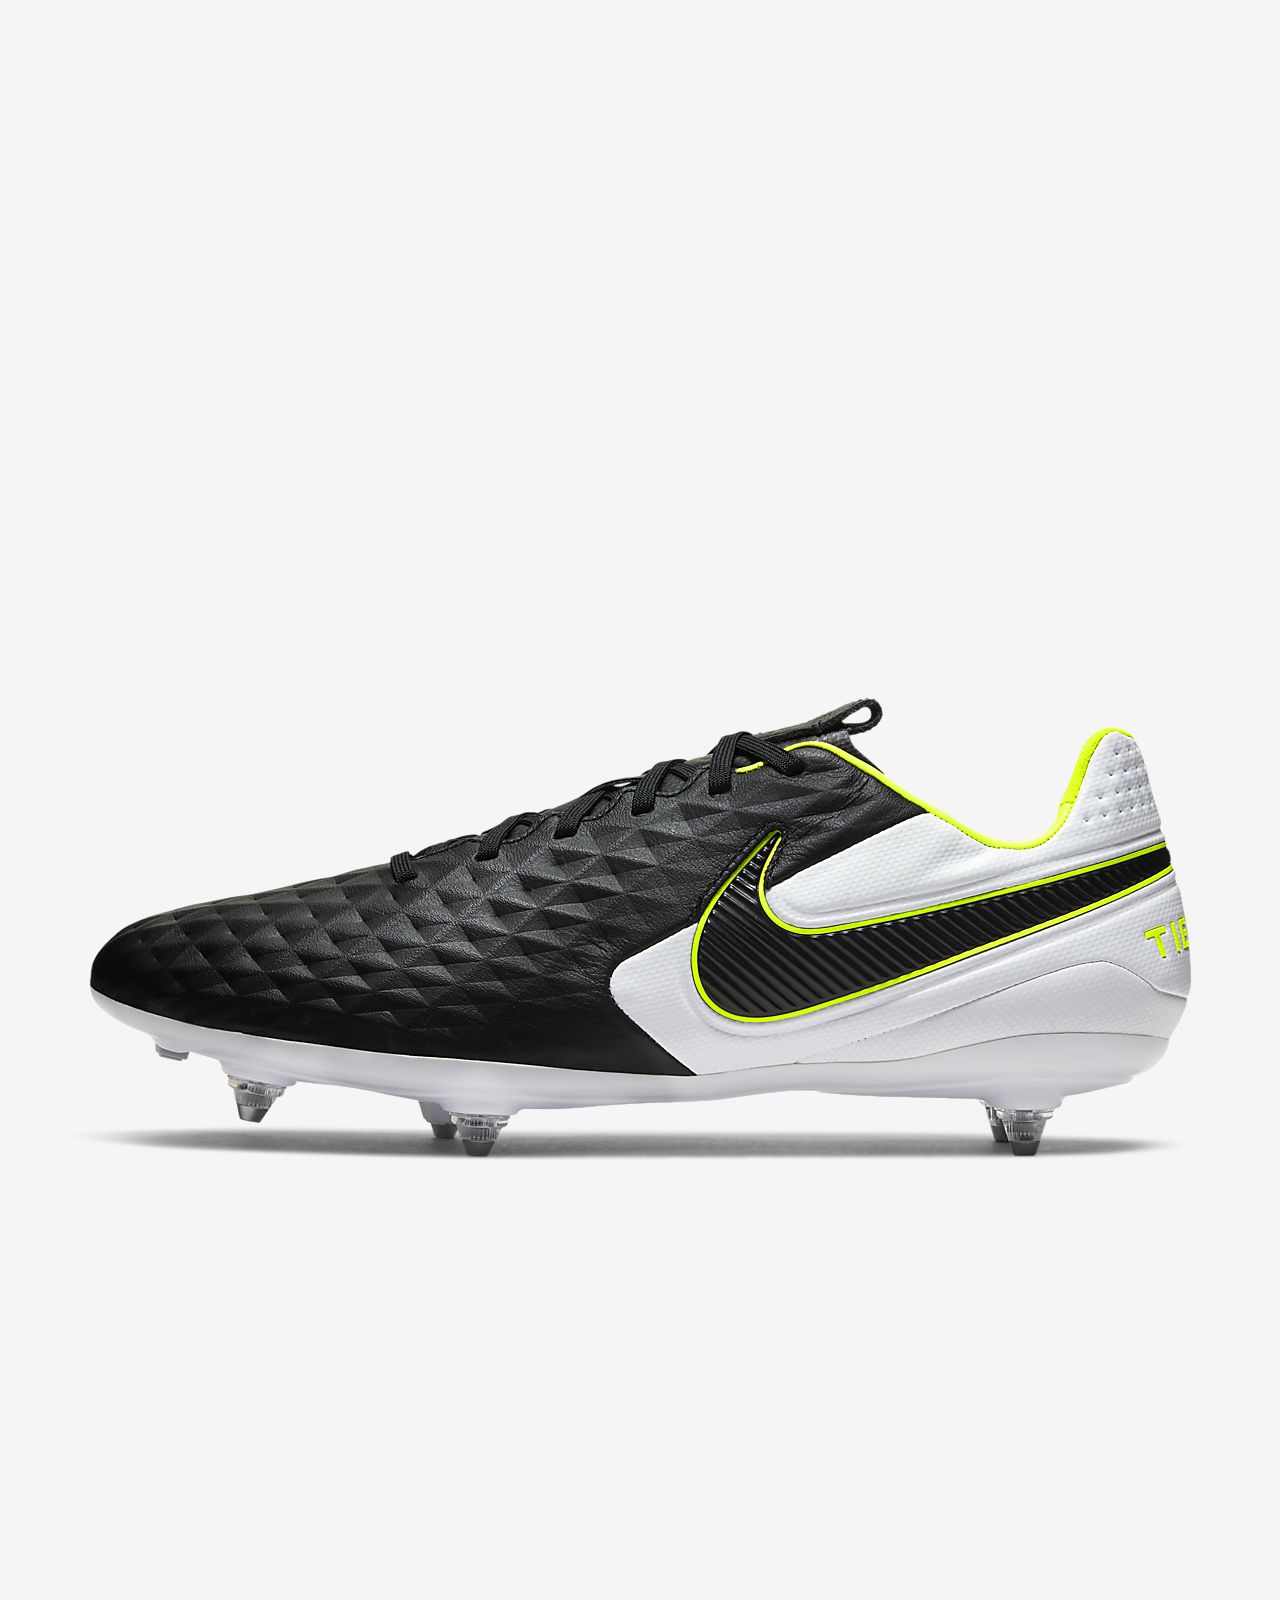 Pro SG Soft-Ground Football Boot. Nike SI